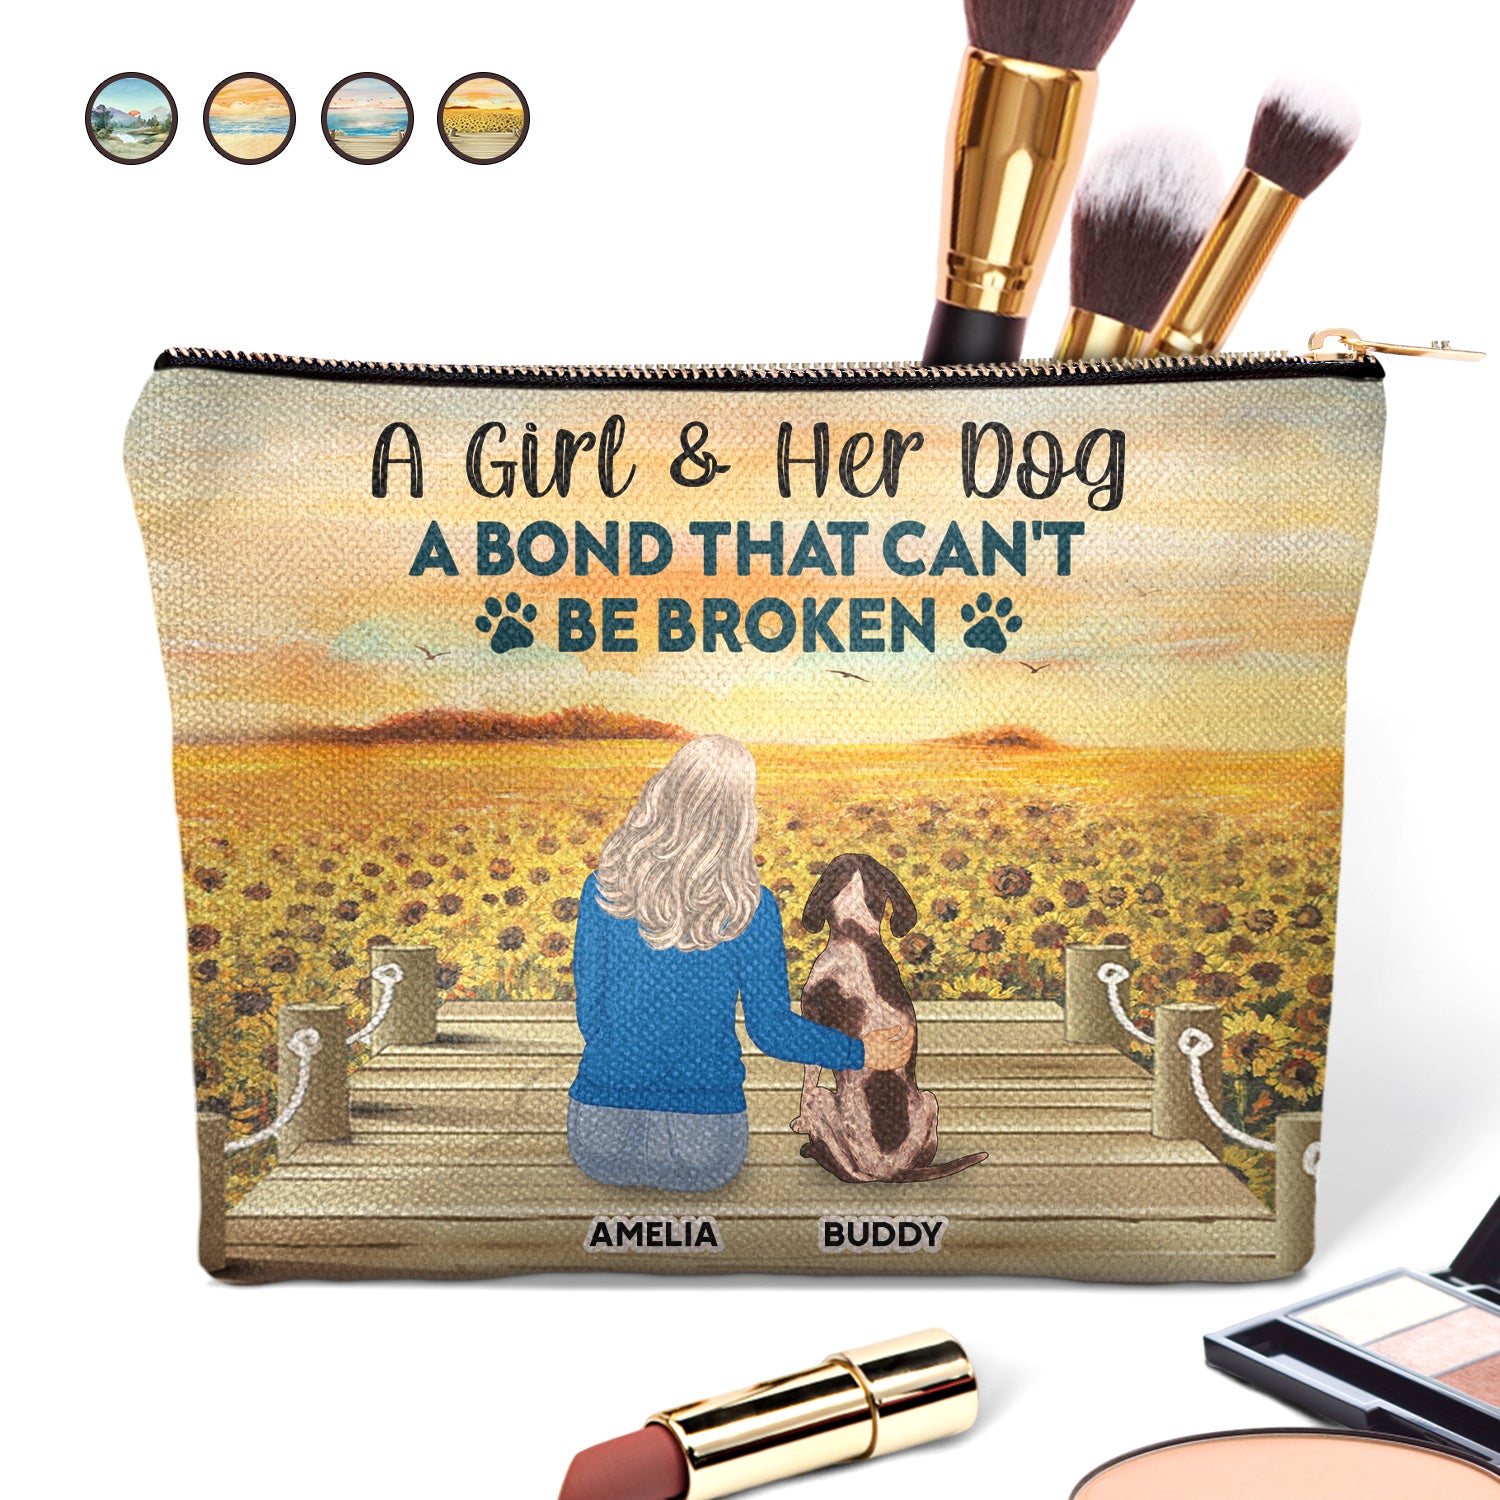 A Bond That Can't Be Broken - Gift For Dog Lovers, Dog Mom - Personalized Cosmetic Bag